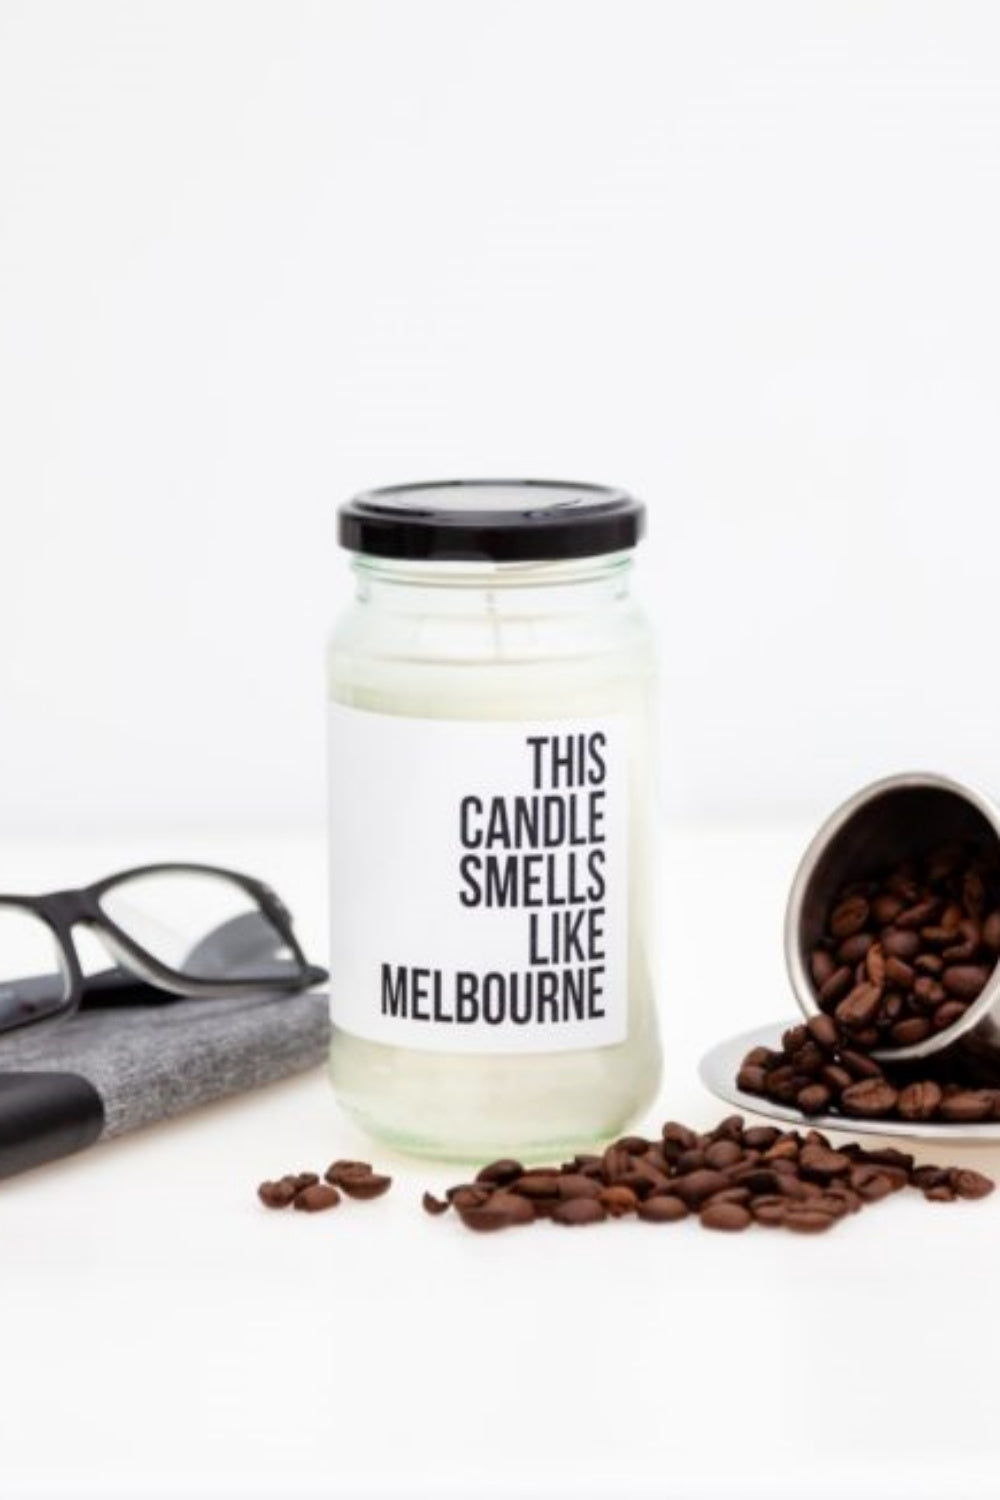 THIS CANDLE SMELLS LIKE MELBOURNE